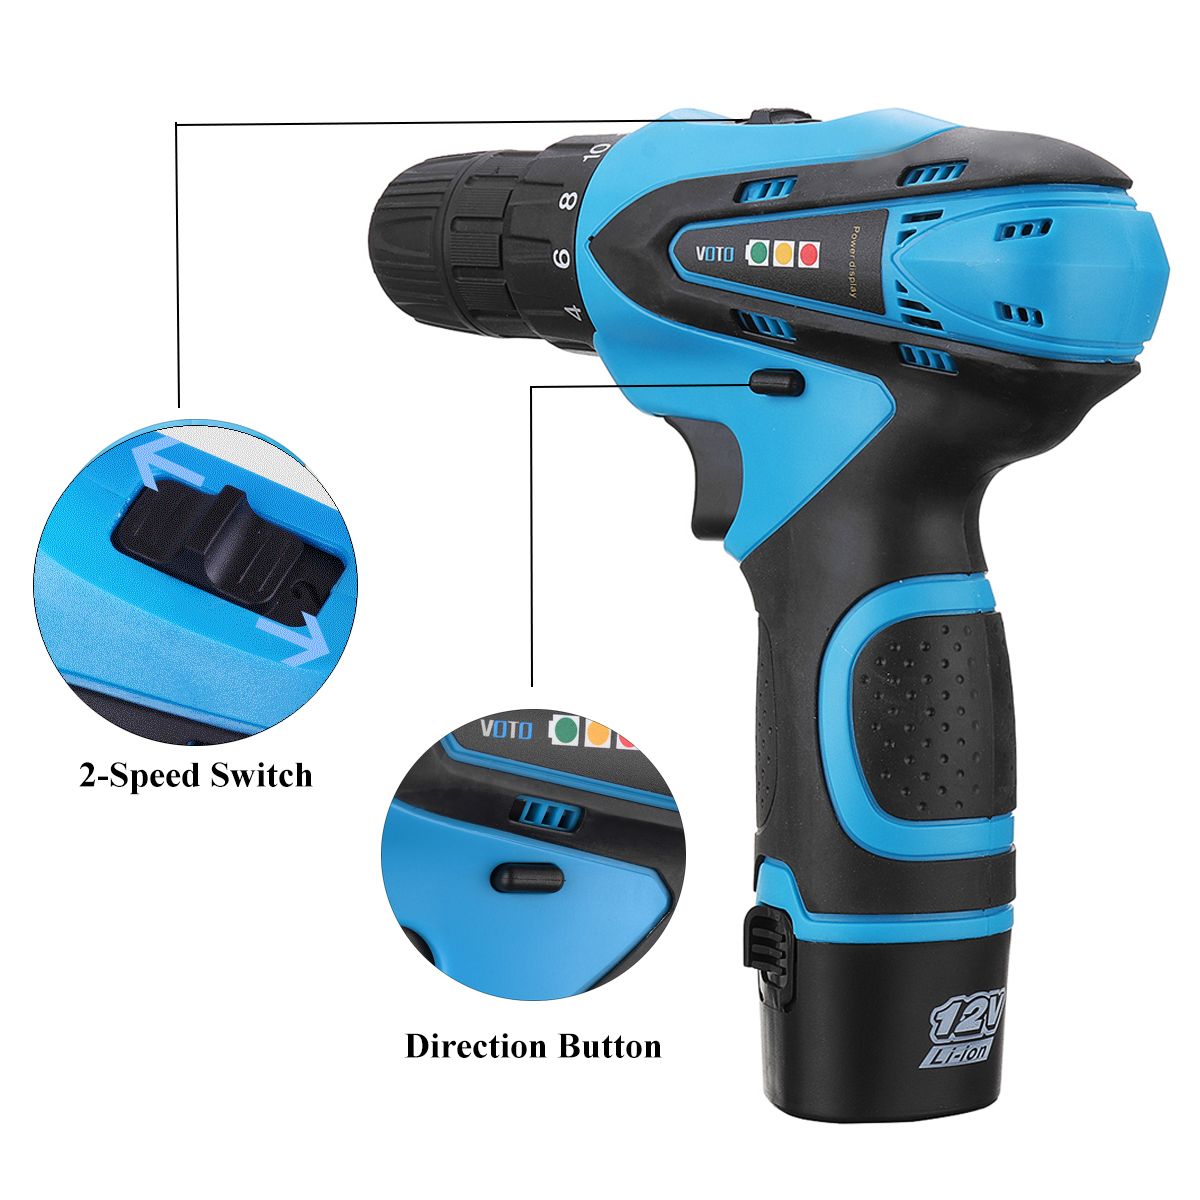 VOTO-12V-Cordless-Power-Drill-Driver-Screw-2-Speed-Lithium-ion-Electric-Screwdriver-with-Battery-1289387